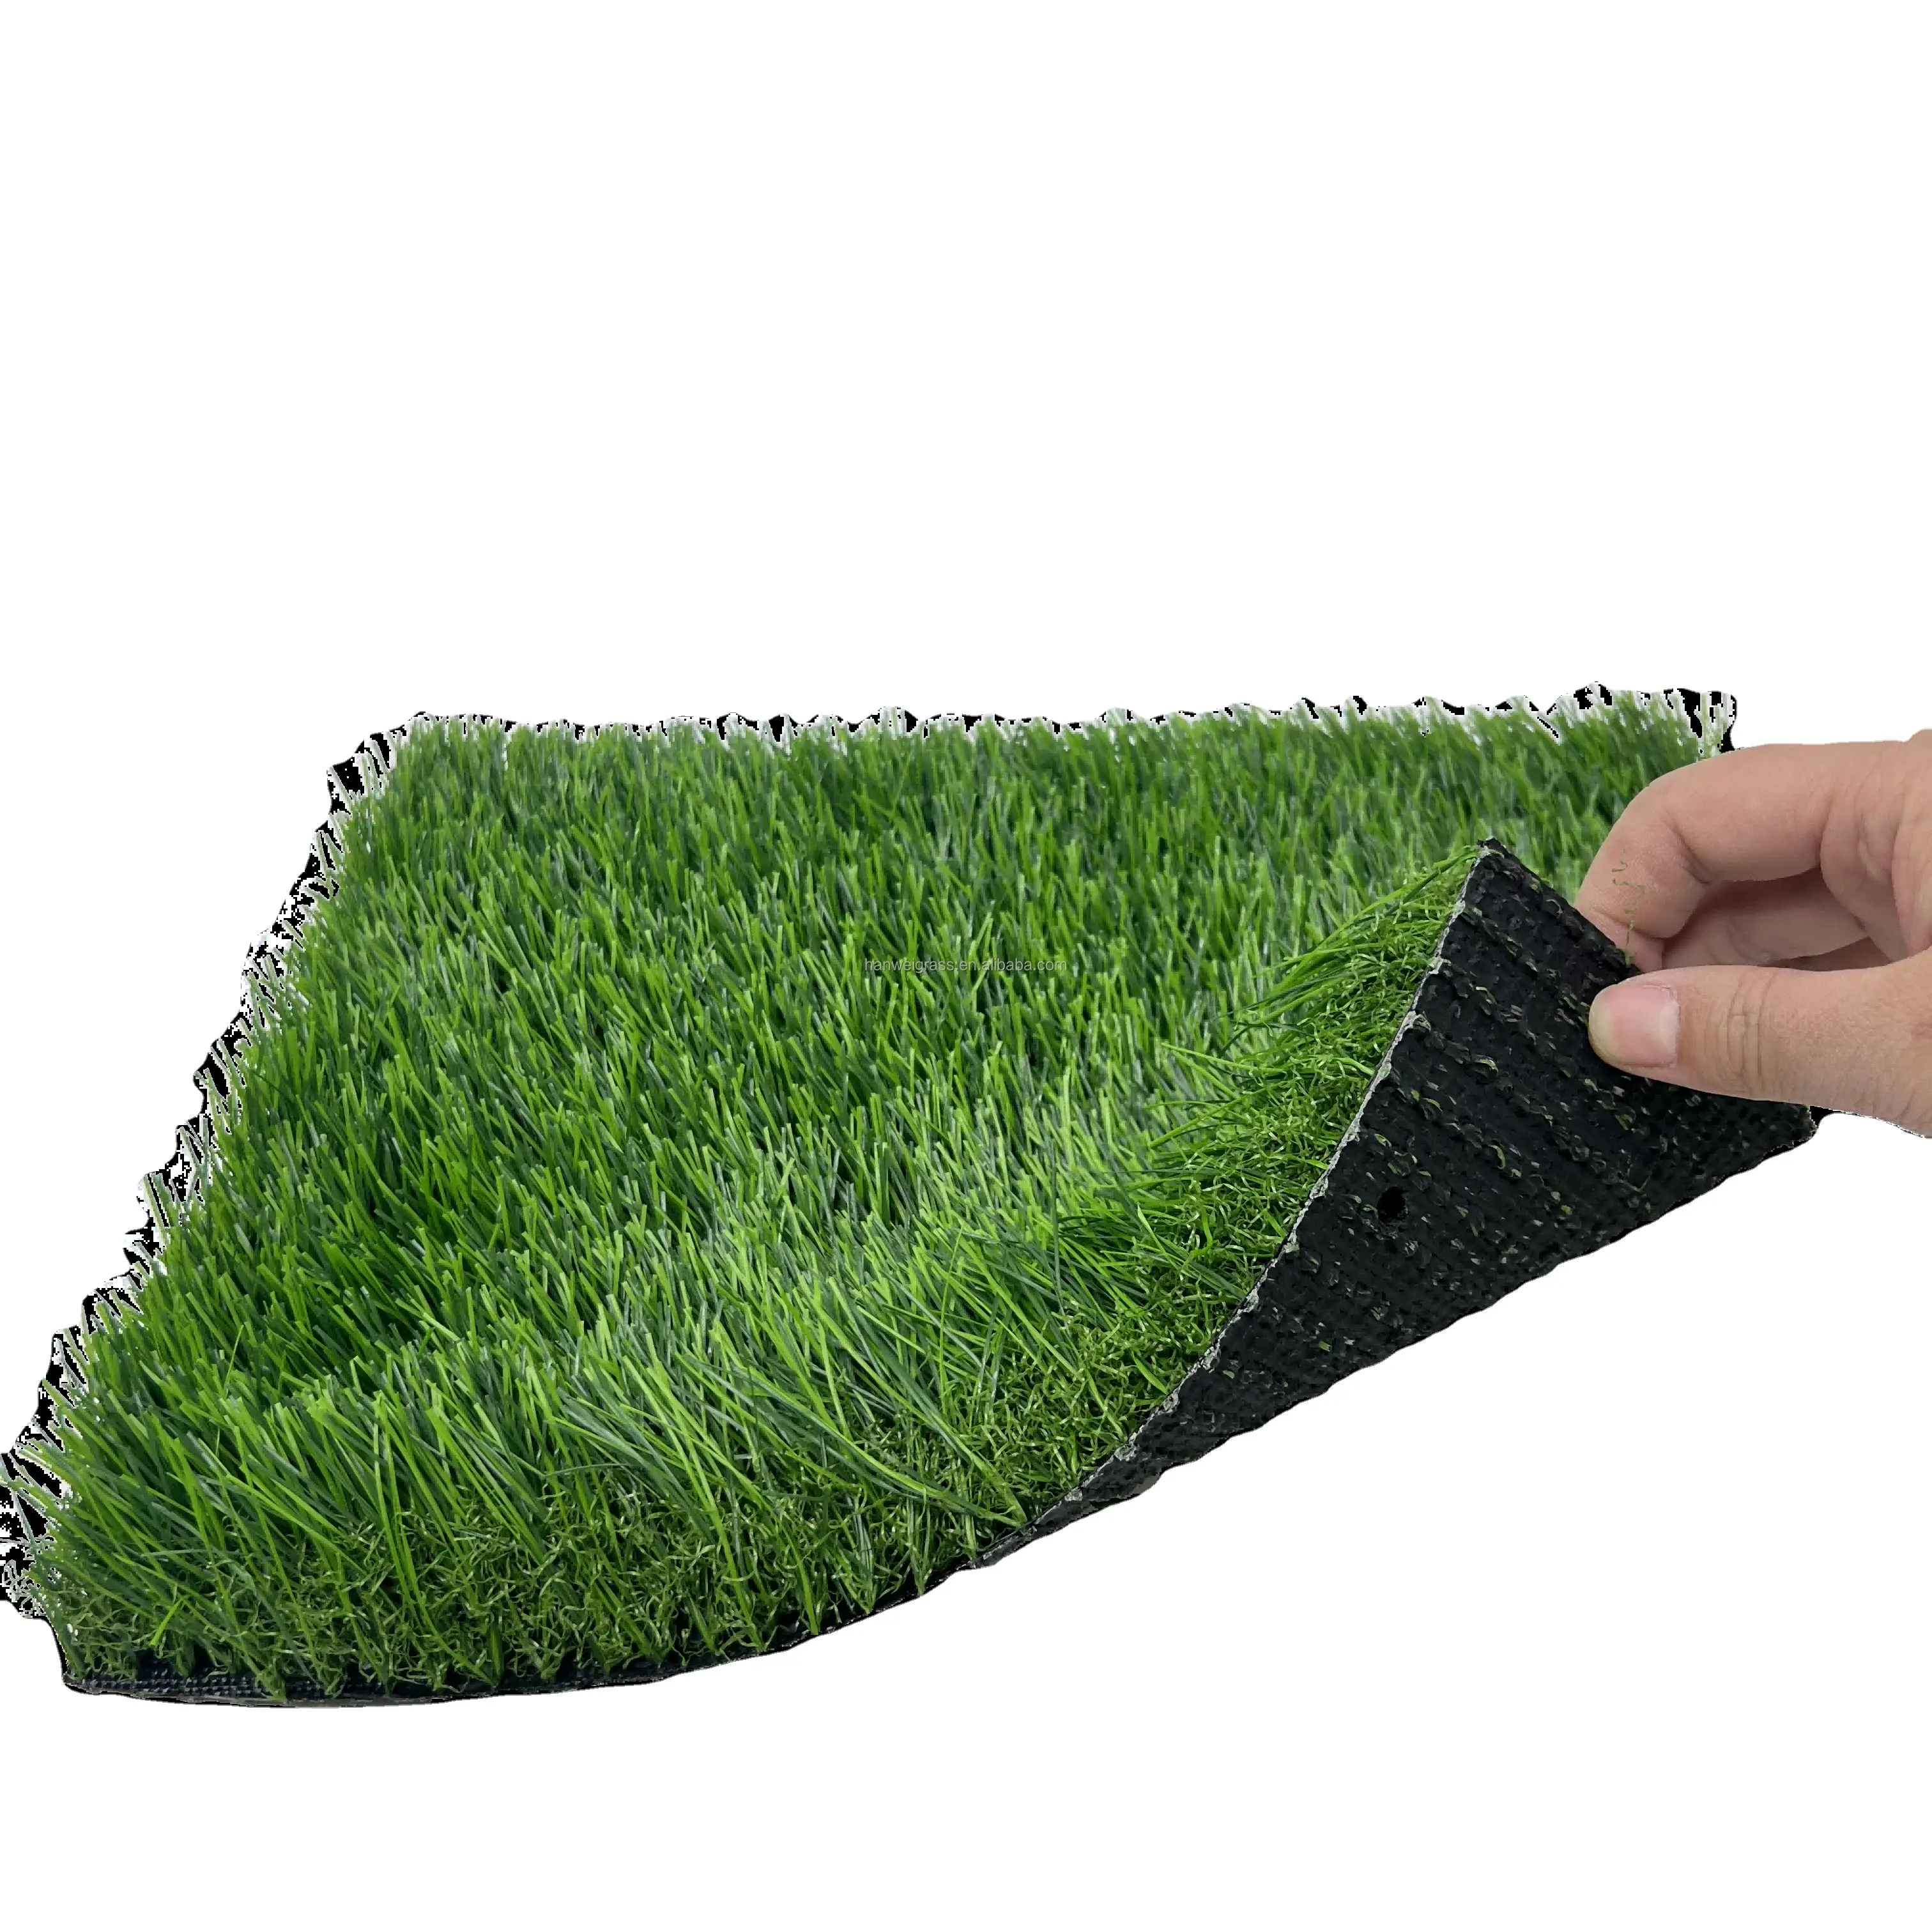 natural landscapes best selling artificial turf peak green Artificial Grass land color artificial grass synthe turf for garden